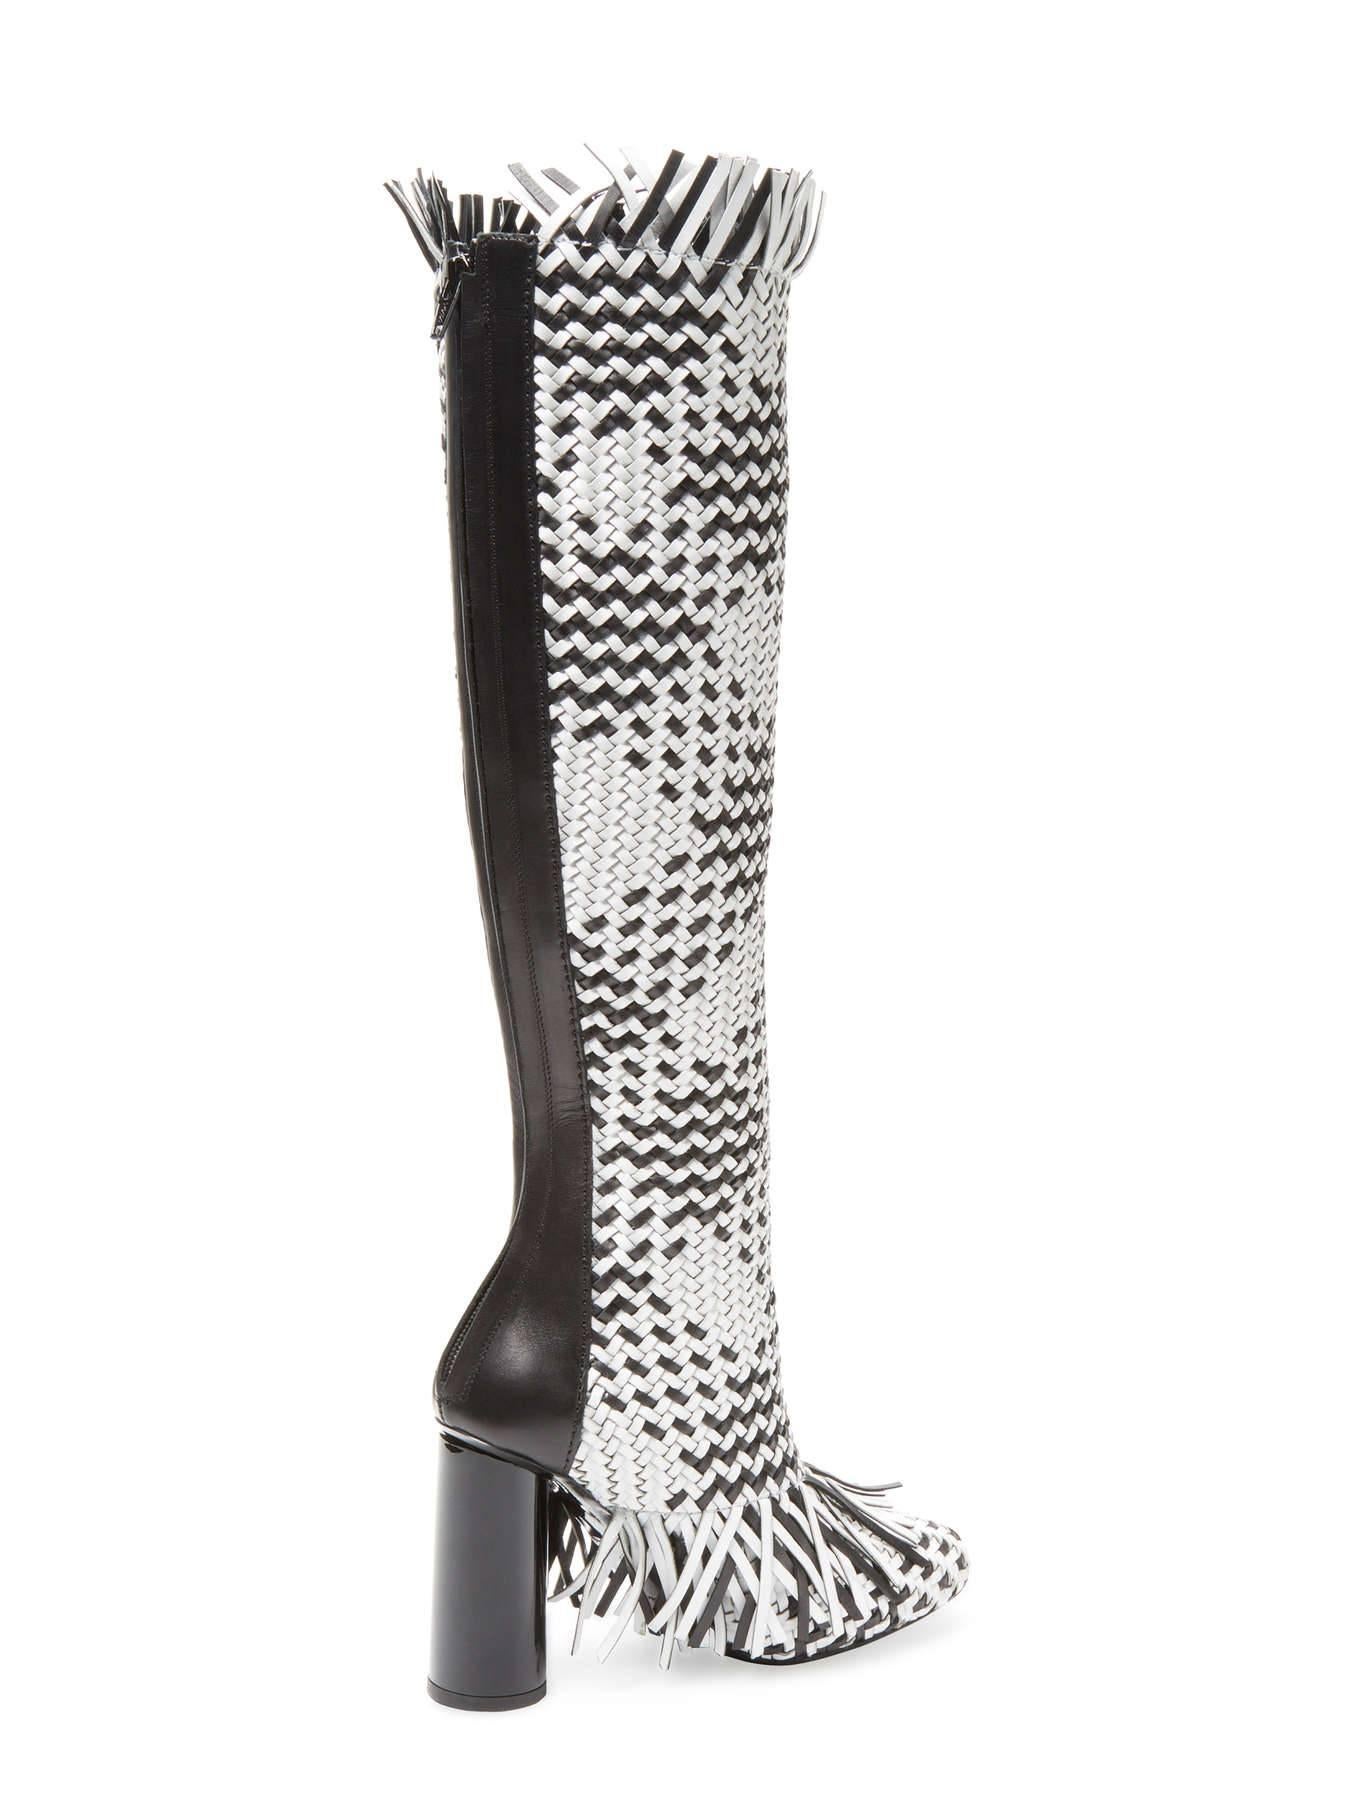 Proenza Schouler New Sold Out Black White Fringe Knee High Boots in Box In New Condition In Chicago, IL